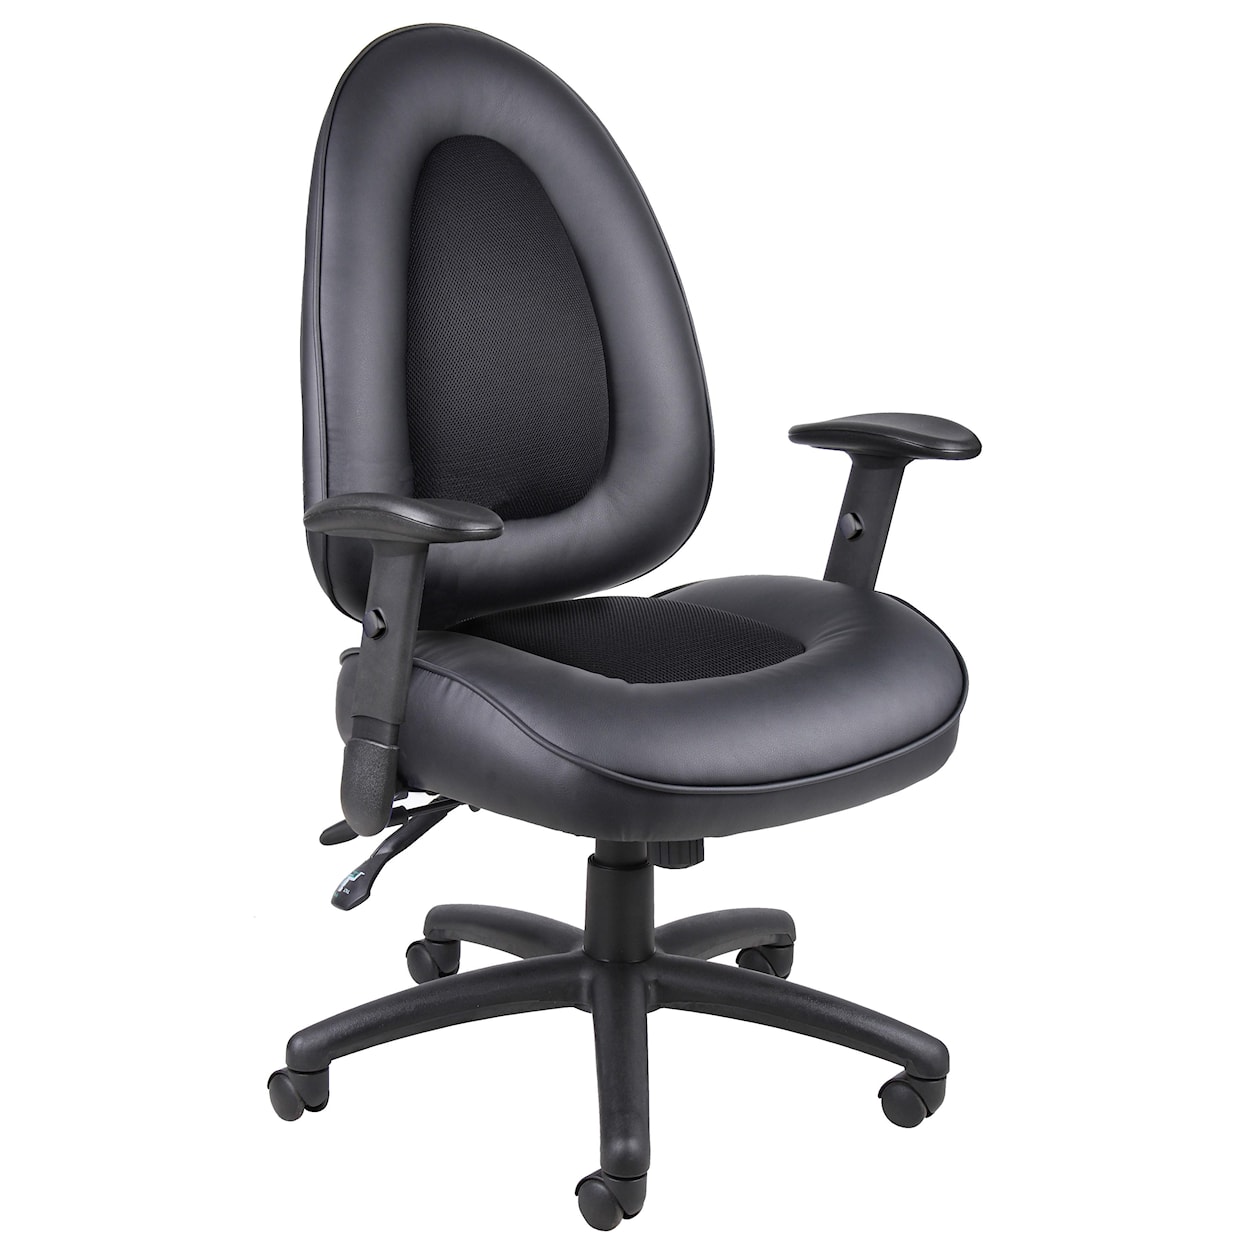 Presidential Seating Executive Chairs Swivel Executive Chair